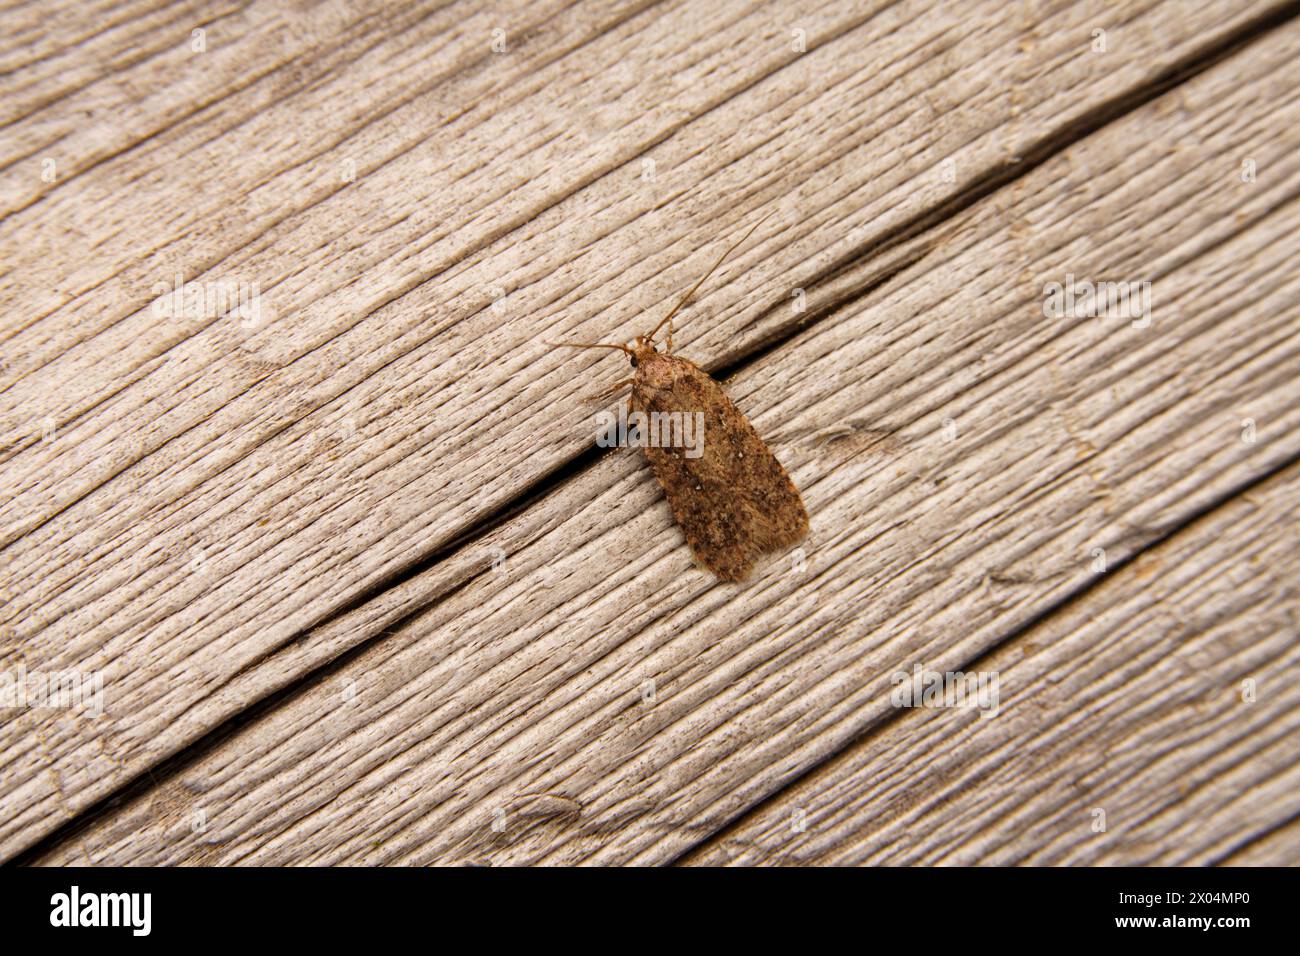 Agonopterix heracliana Family Depressariidae Genus Agonopterix Common Brindled Brown moth Common Flat-body moth wild nature insect photography, pictur Stock Photo